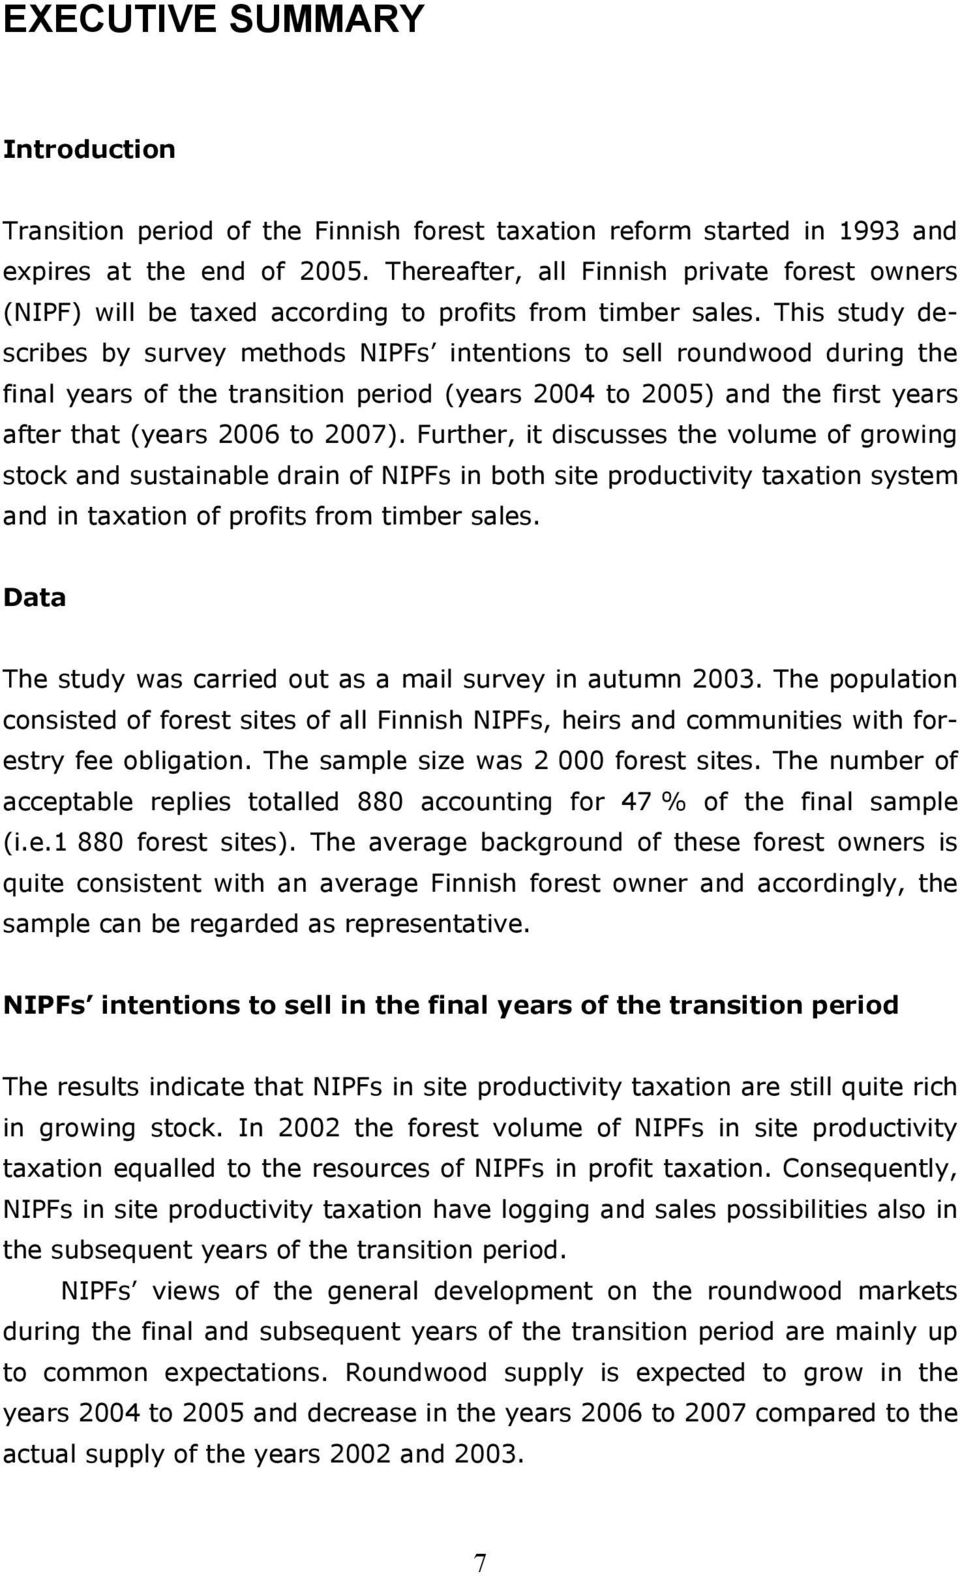 This study describes by survey methods NIPFs intentions to sell roundwood during the final years of the transition period (years 2004 to 2005) and the first years after that (years 2006 to 2007).